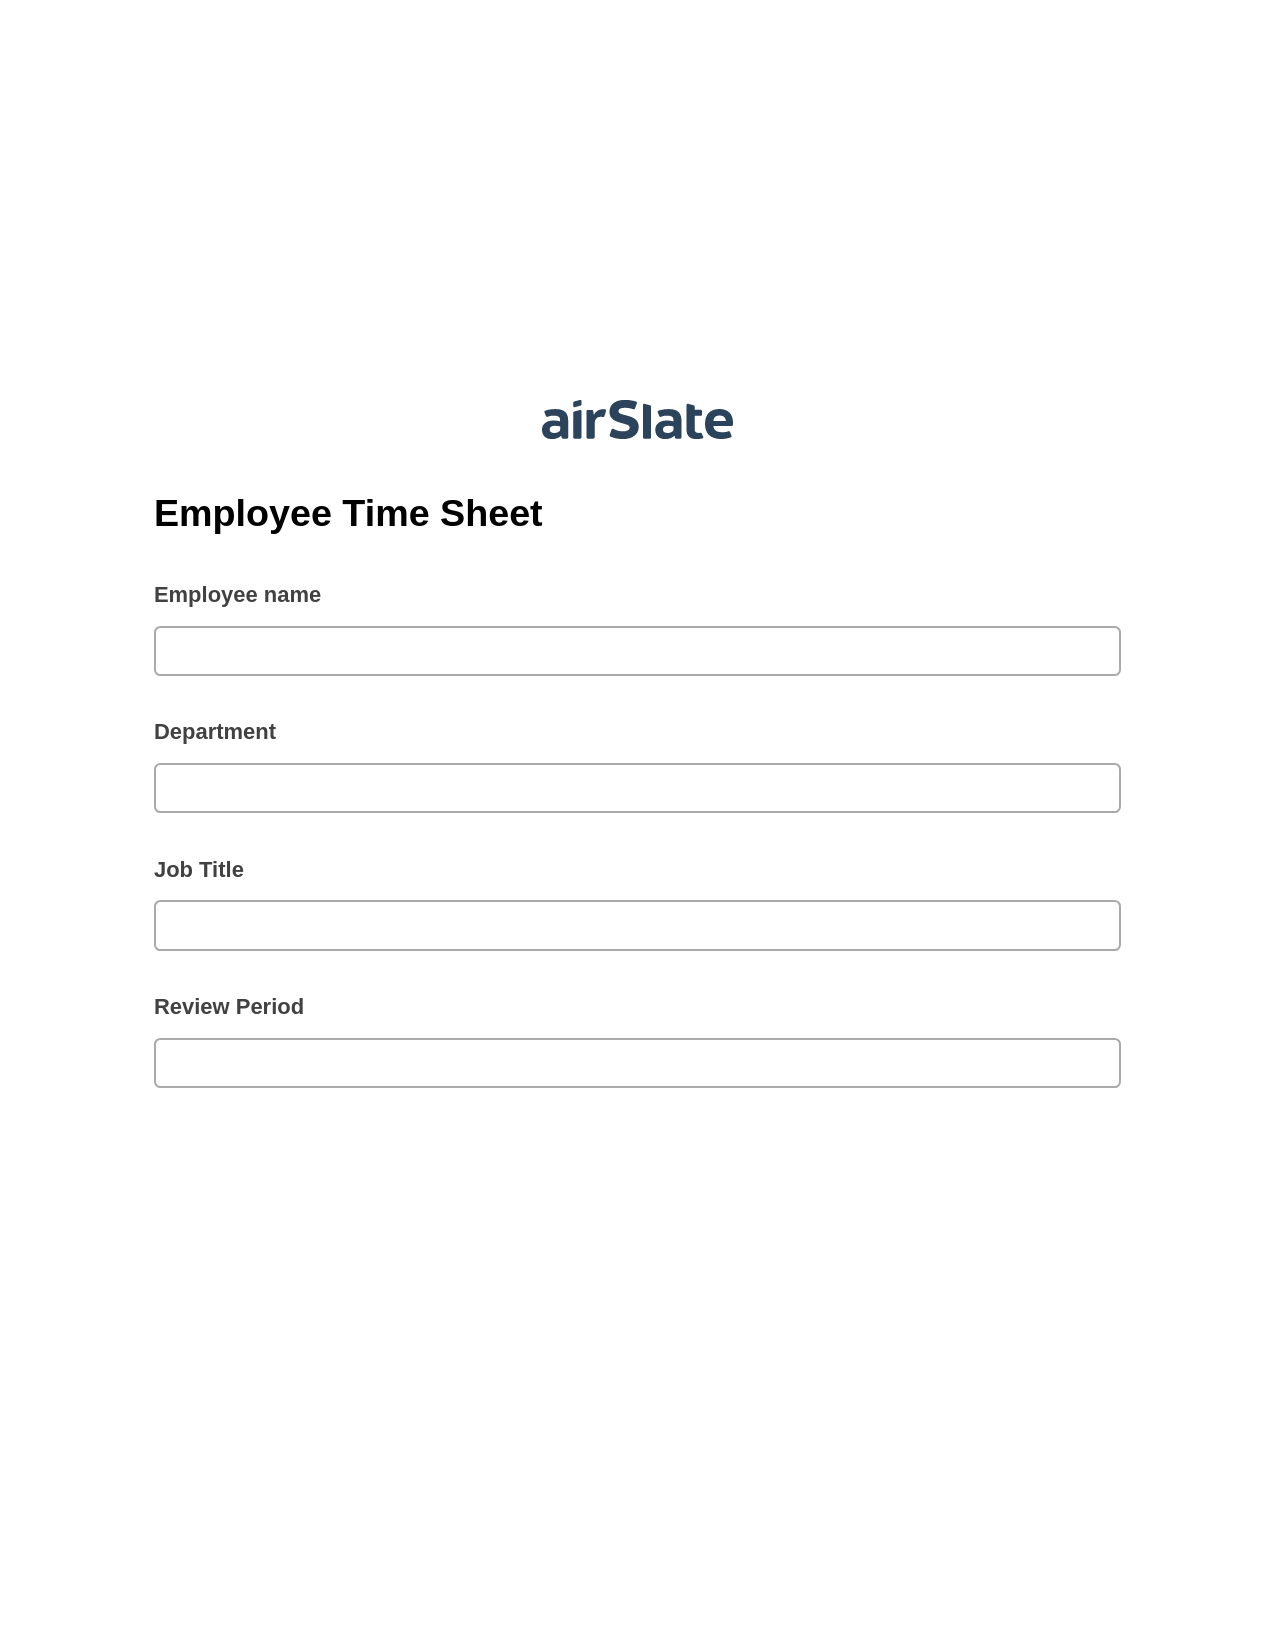 Employee Time Sheet Pre-fill Dropdowns from Office 365 Excel Bot, Update Audit Trail Bot, Export to Excel 365 Bot